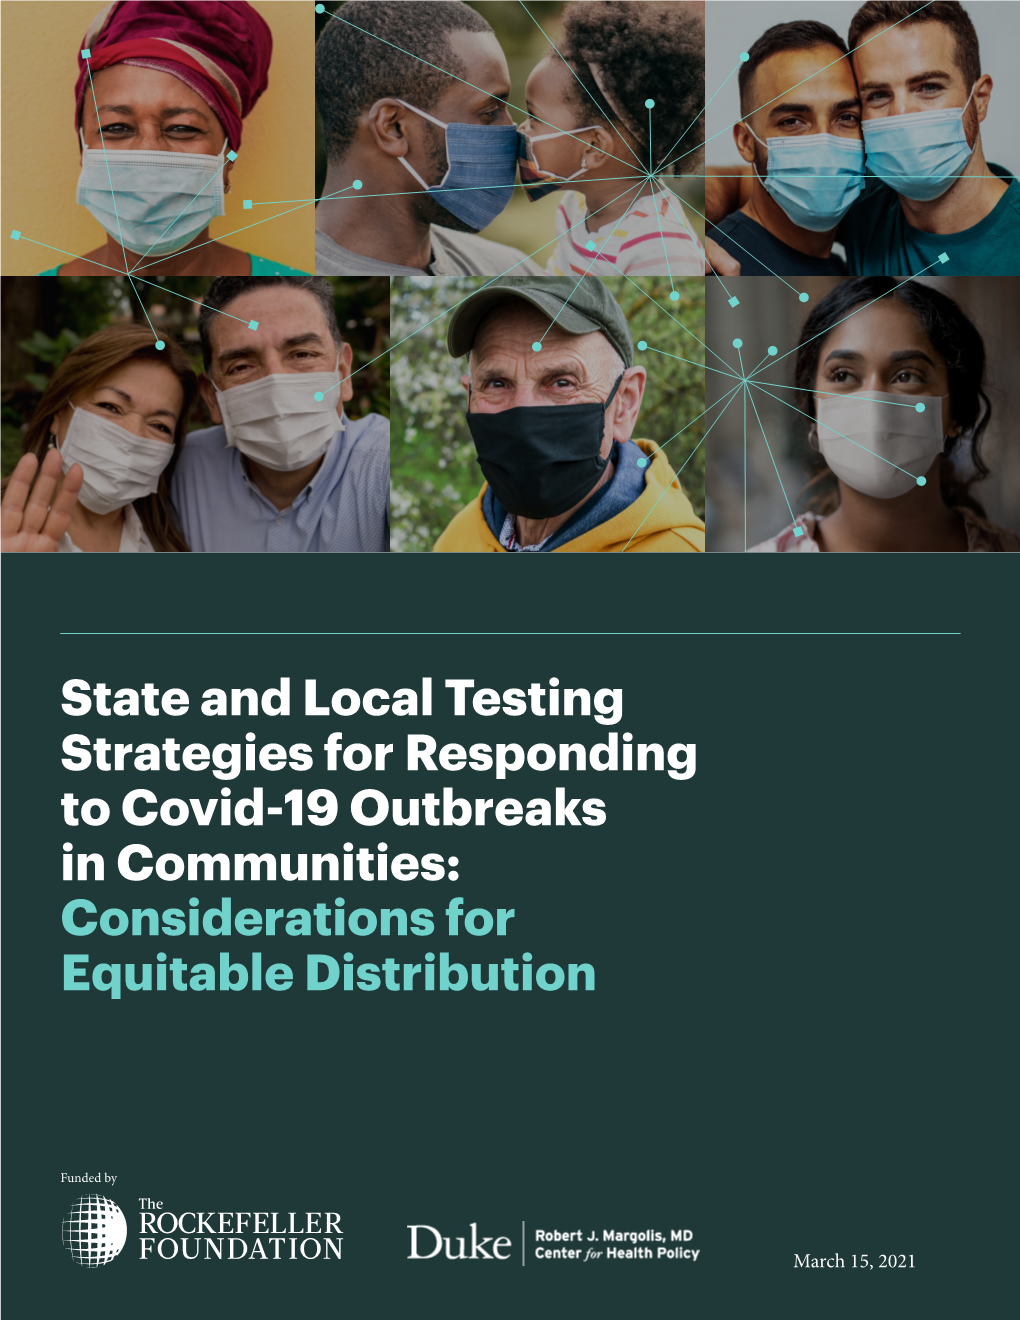 State and Local Testing Strategies for Responding to Covid-19 Outbreaks in Communities: Considerations for Equitable Distribution